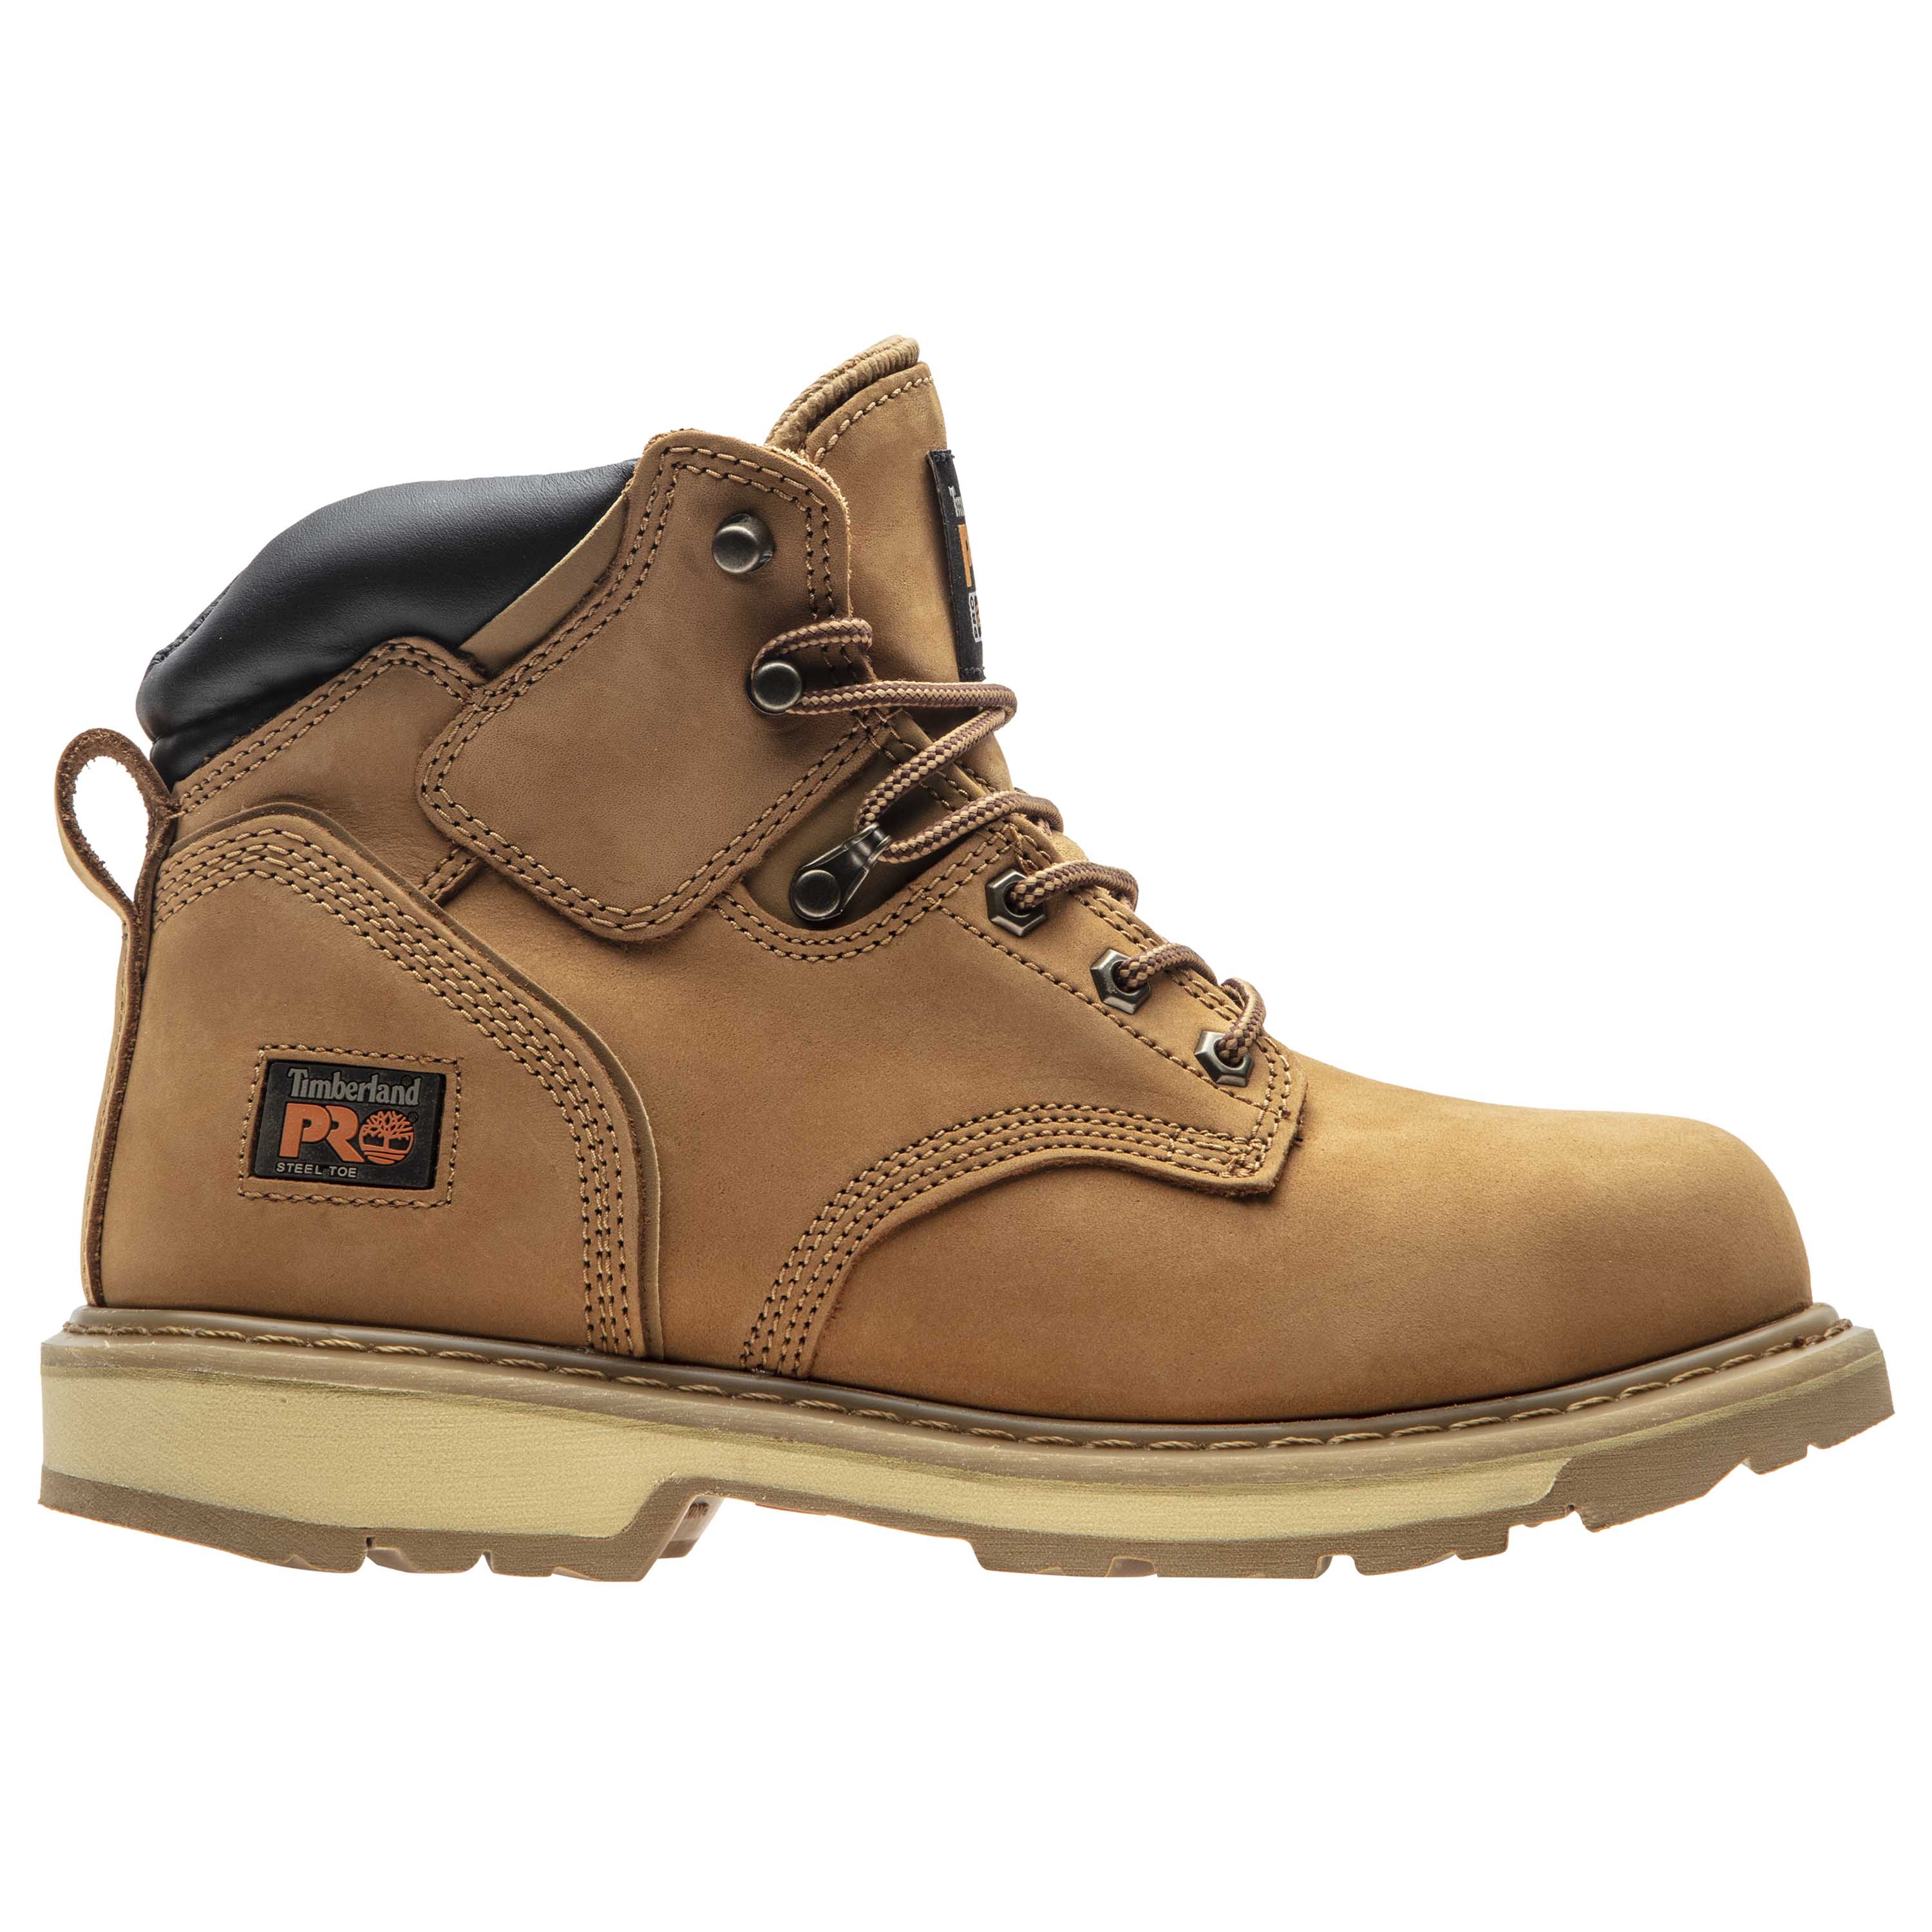 steel toe boots outfit